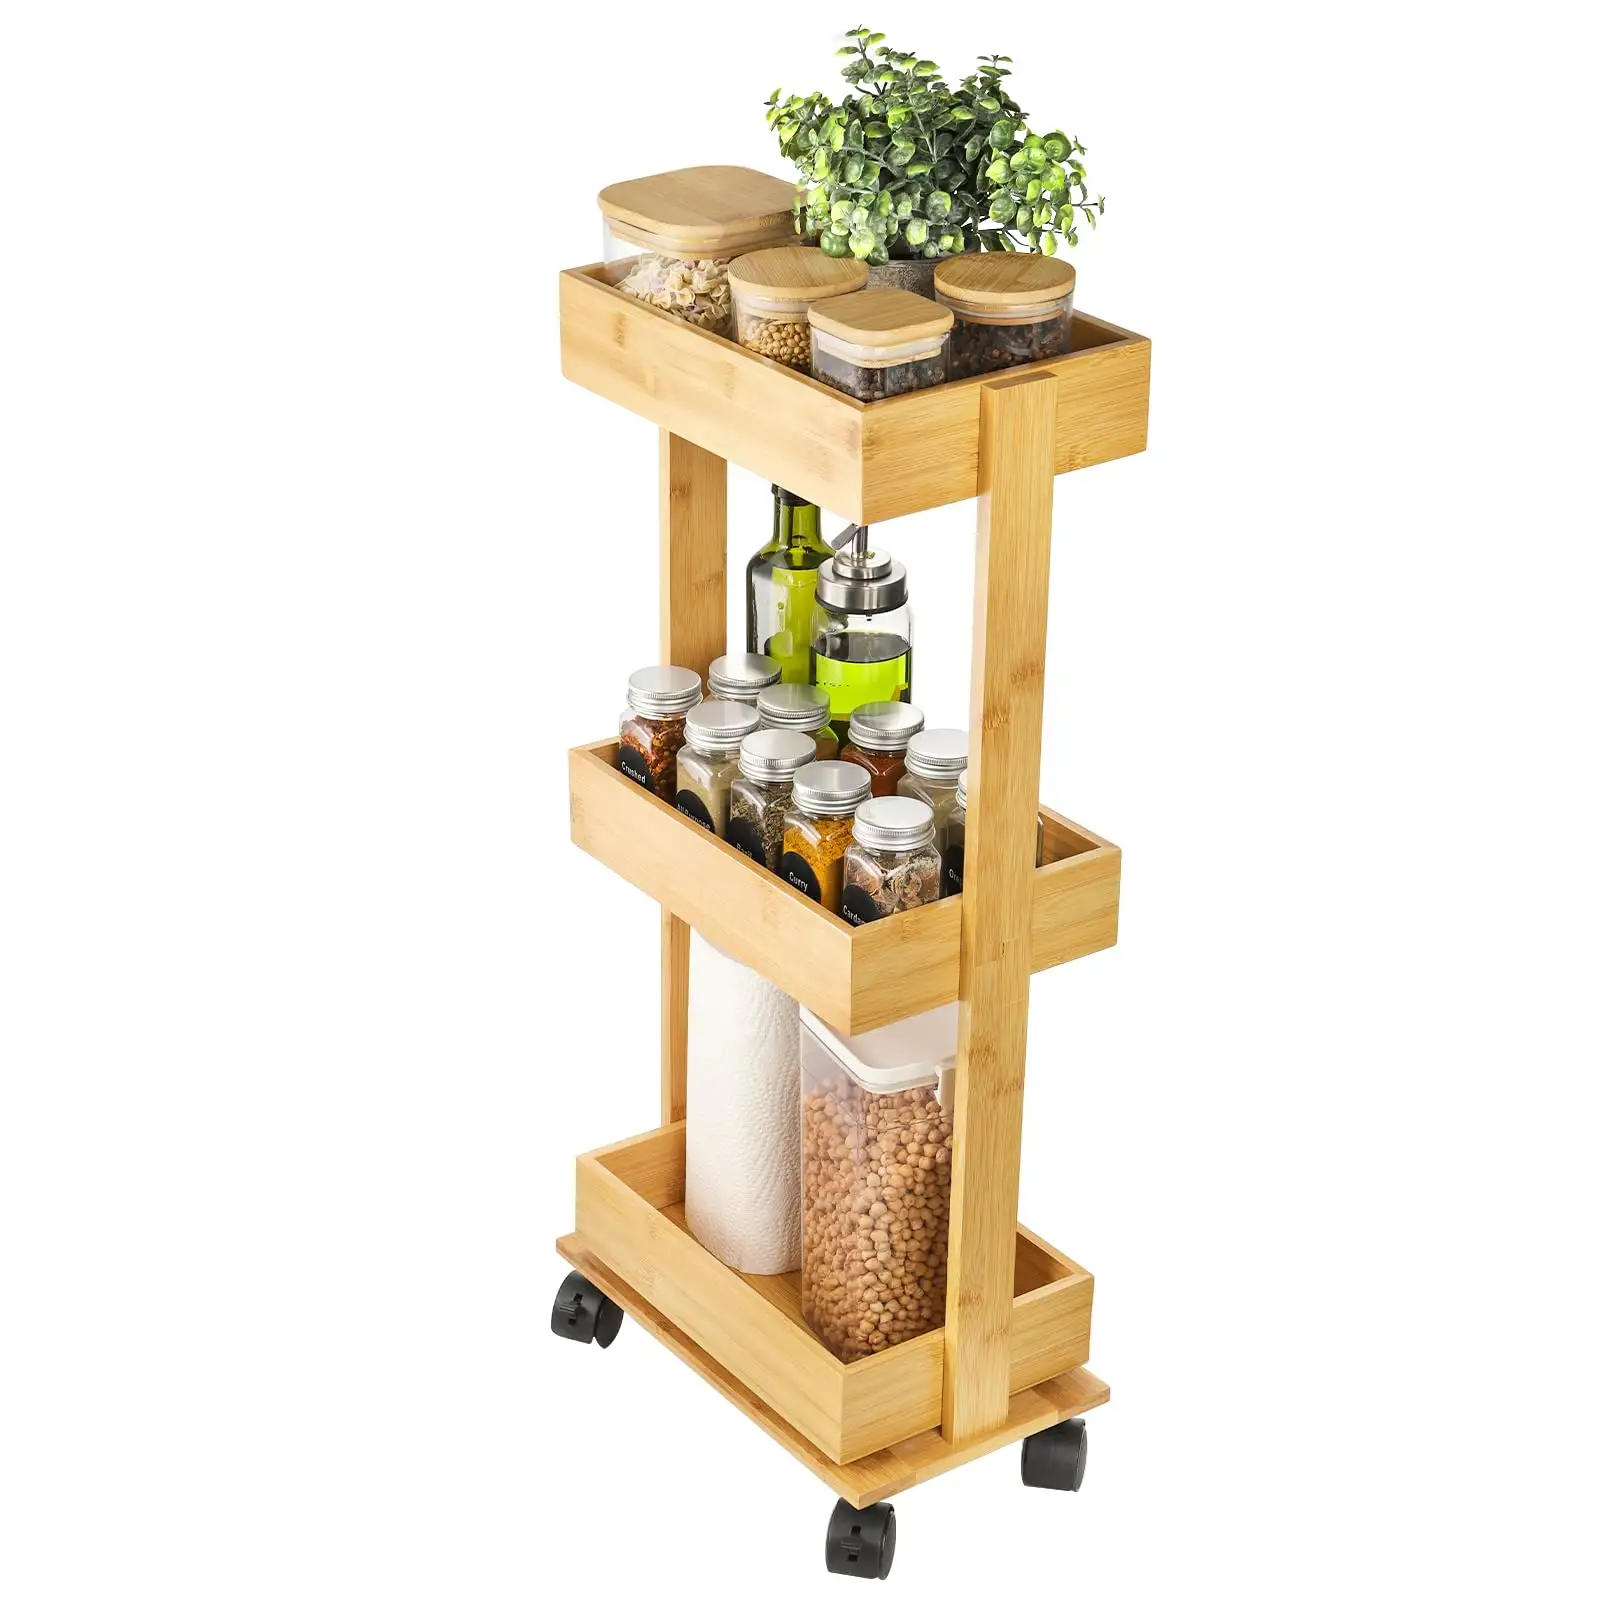 3-Tier Bamboo Mobile Shelving Rolling Utility Cart on Wheel for Office Bathroom Kitchen Laundry Room Narrow Place